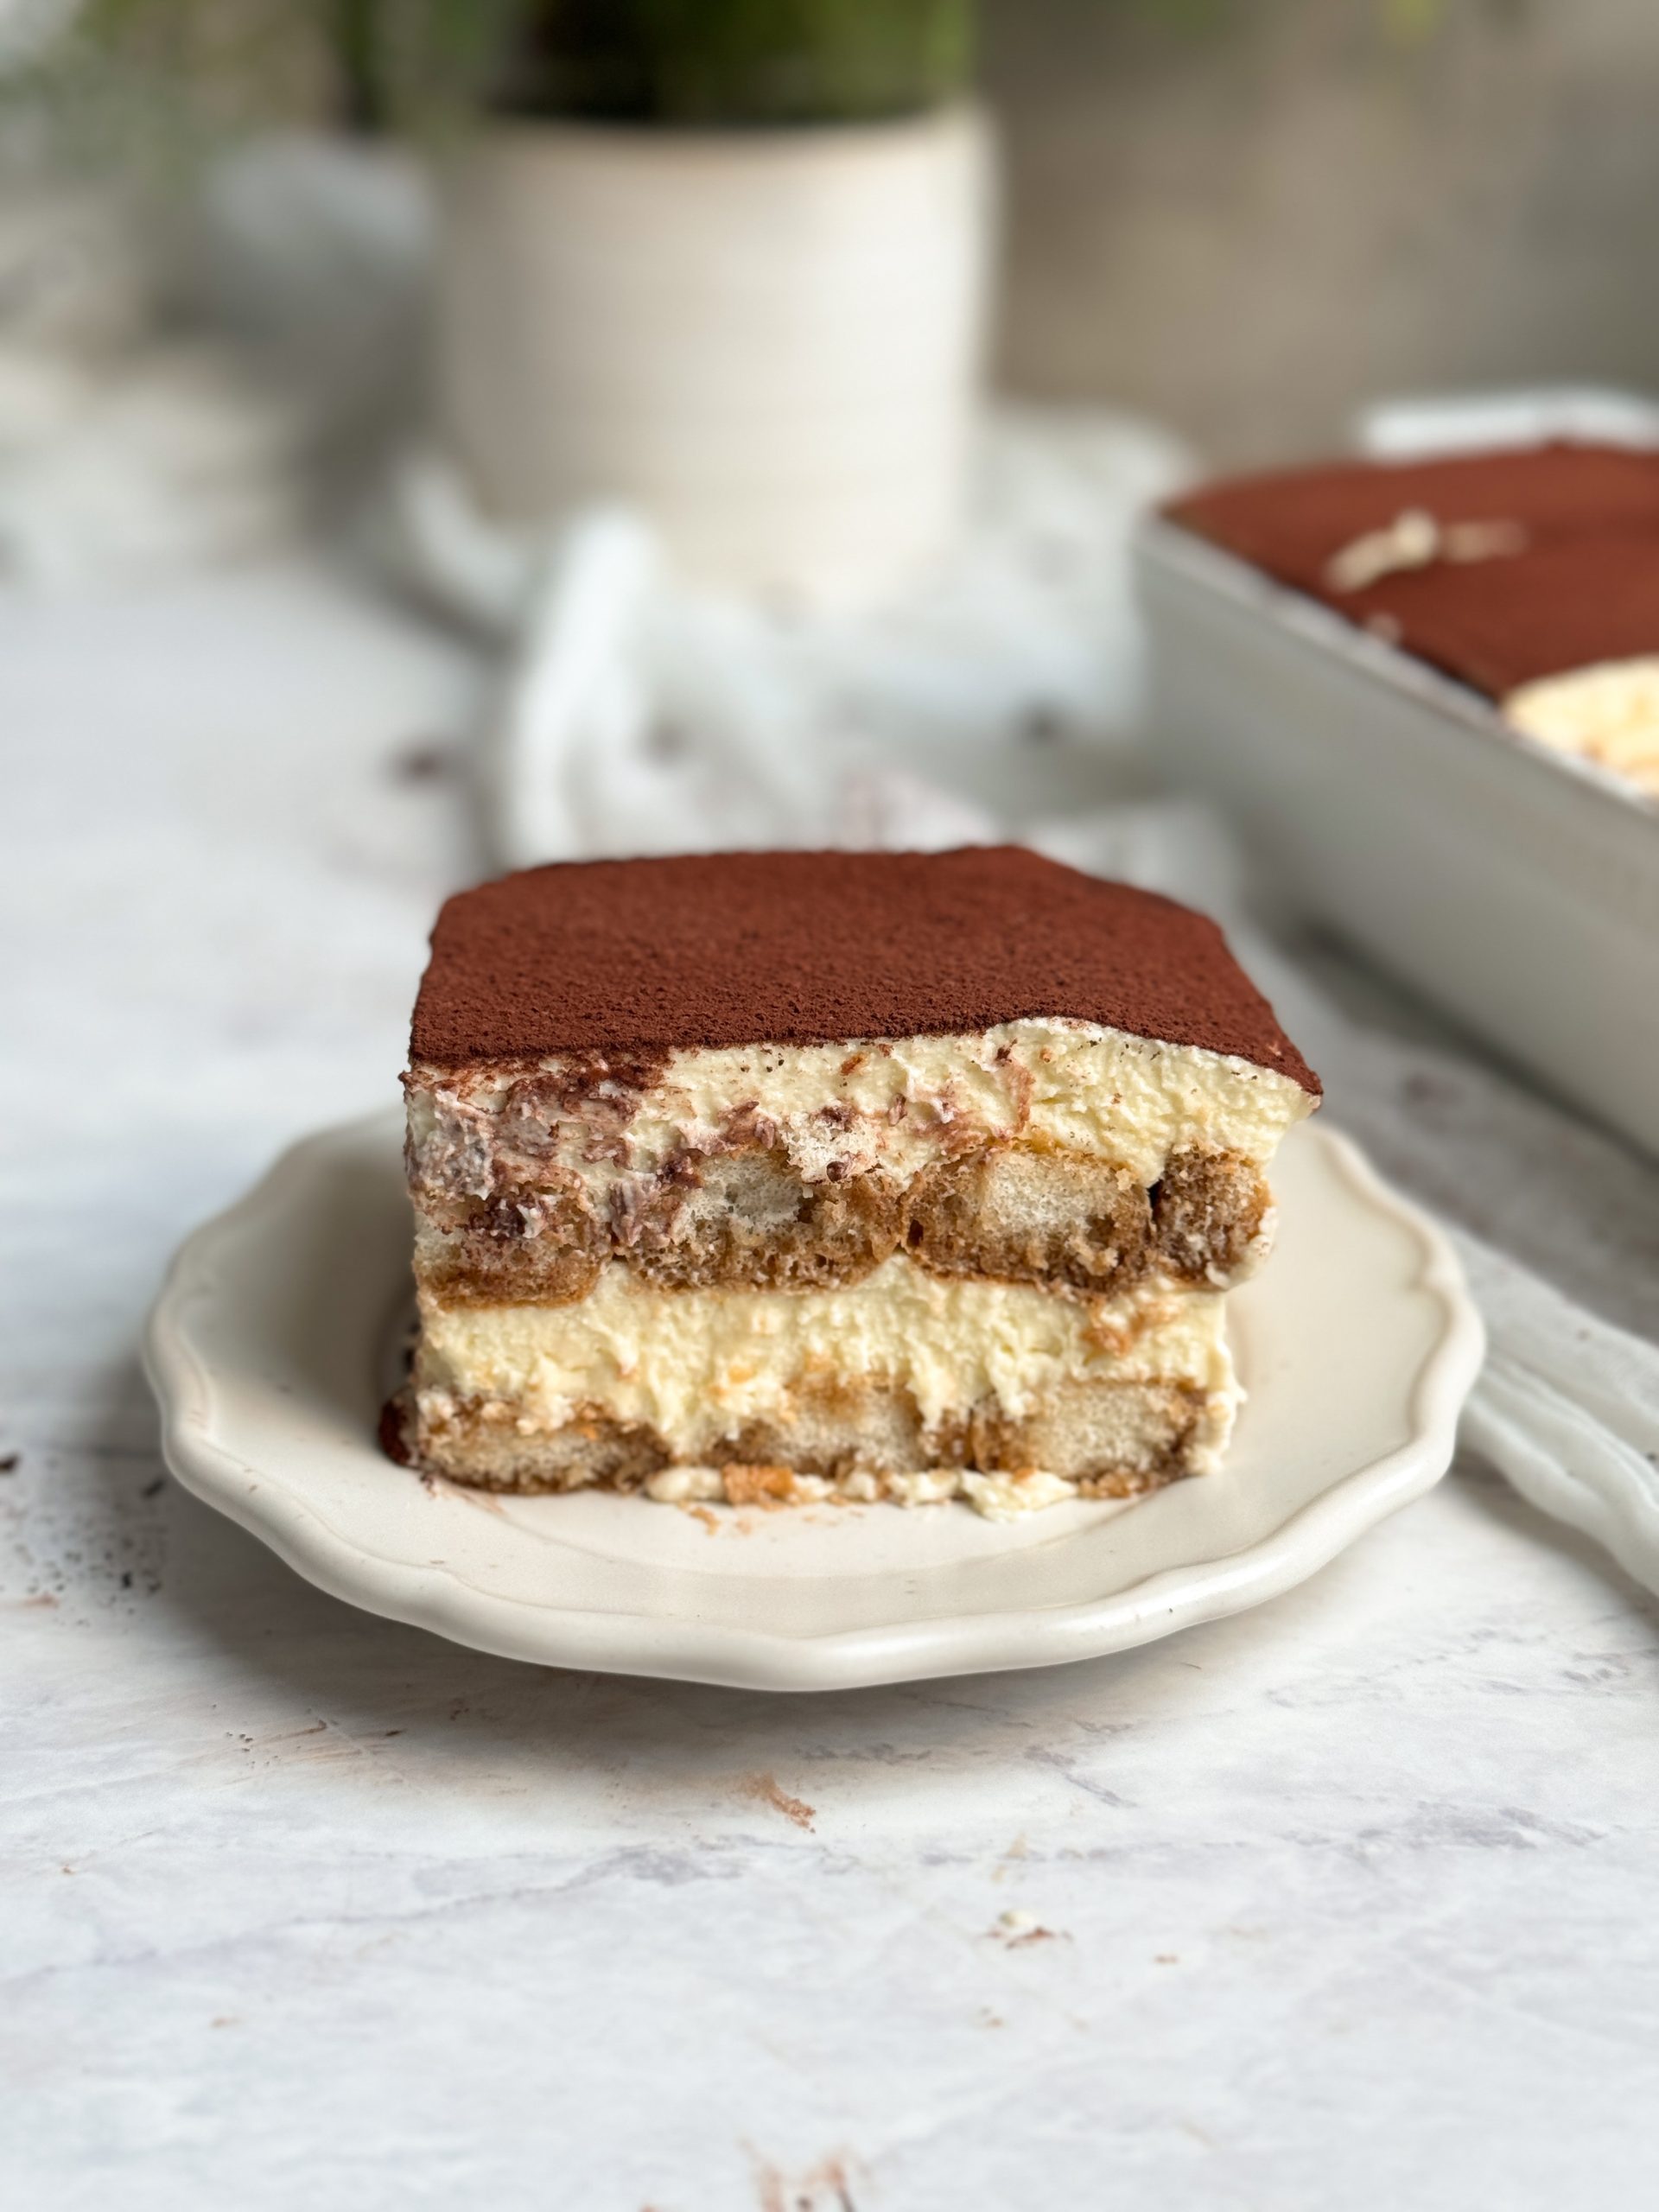 slice of tiramisu on a small plate, picture from the side to show layers of cream and ladyfingers, topped with cocoa powder